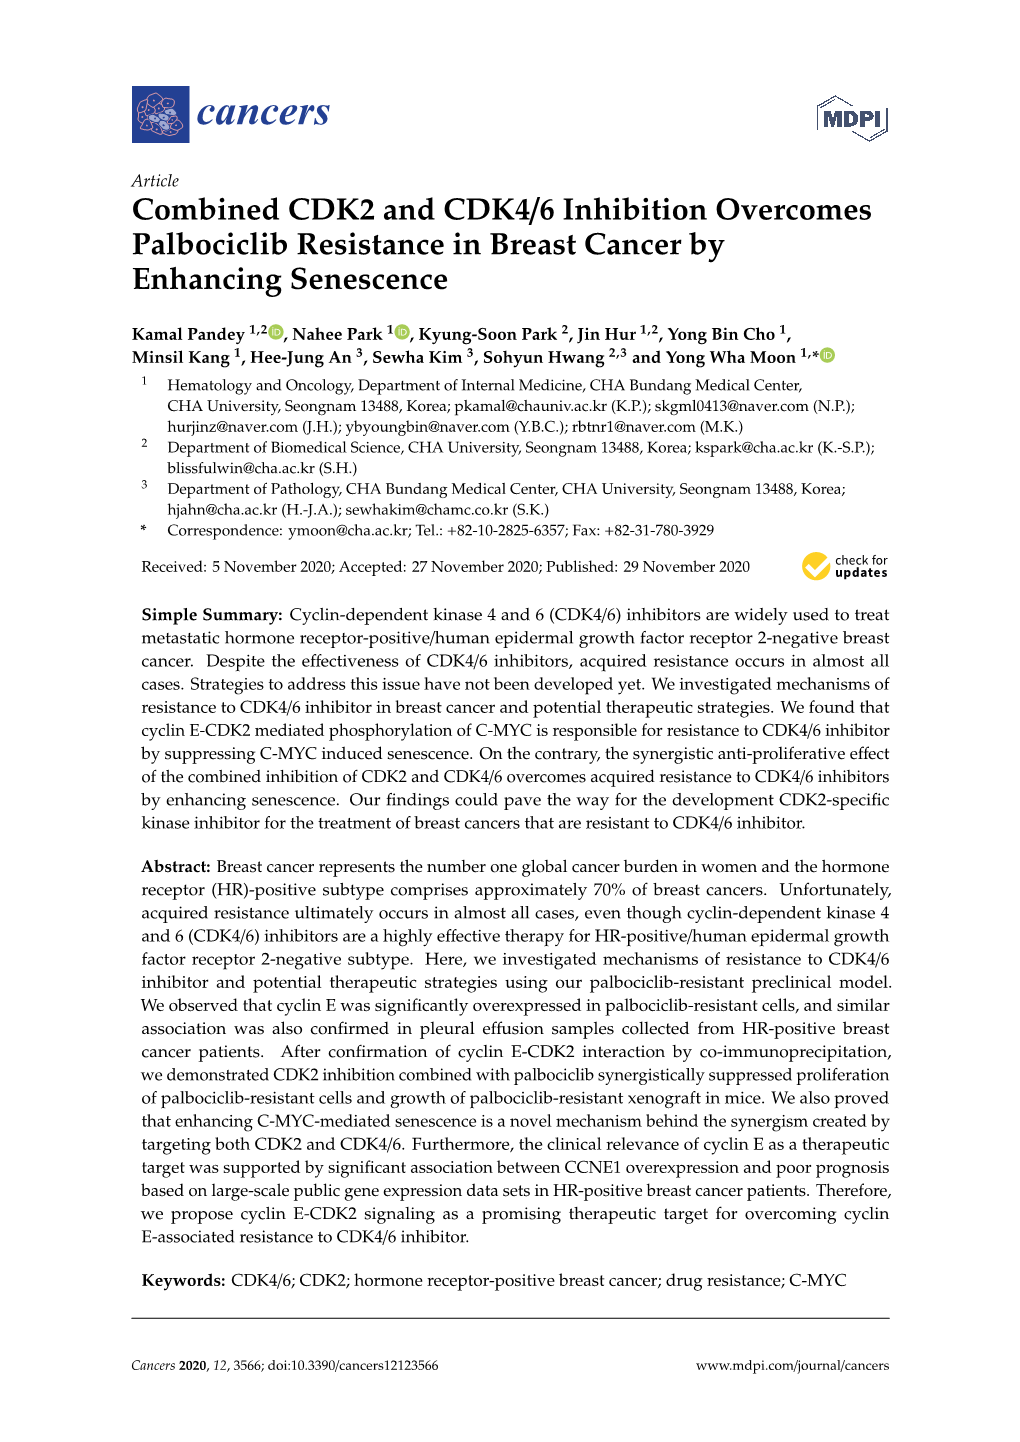 Combined CDK2 and CDK4/6 Inhibition Overcomes Palbociclib Resistance in Breast Cancer by Enhancing Senescence